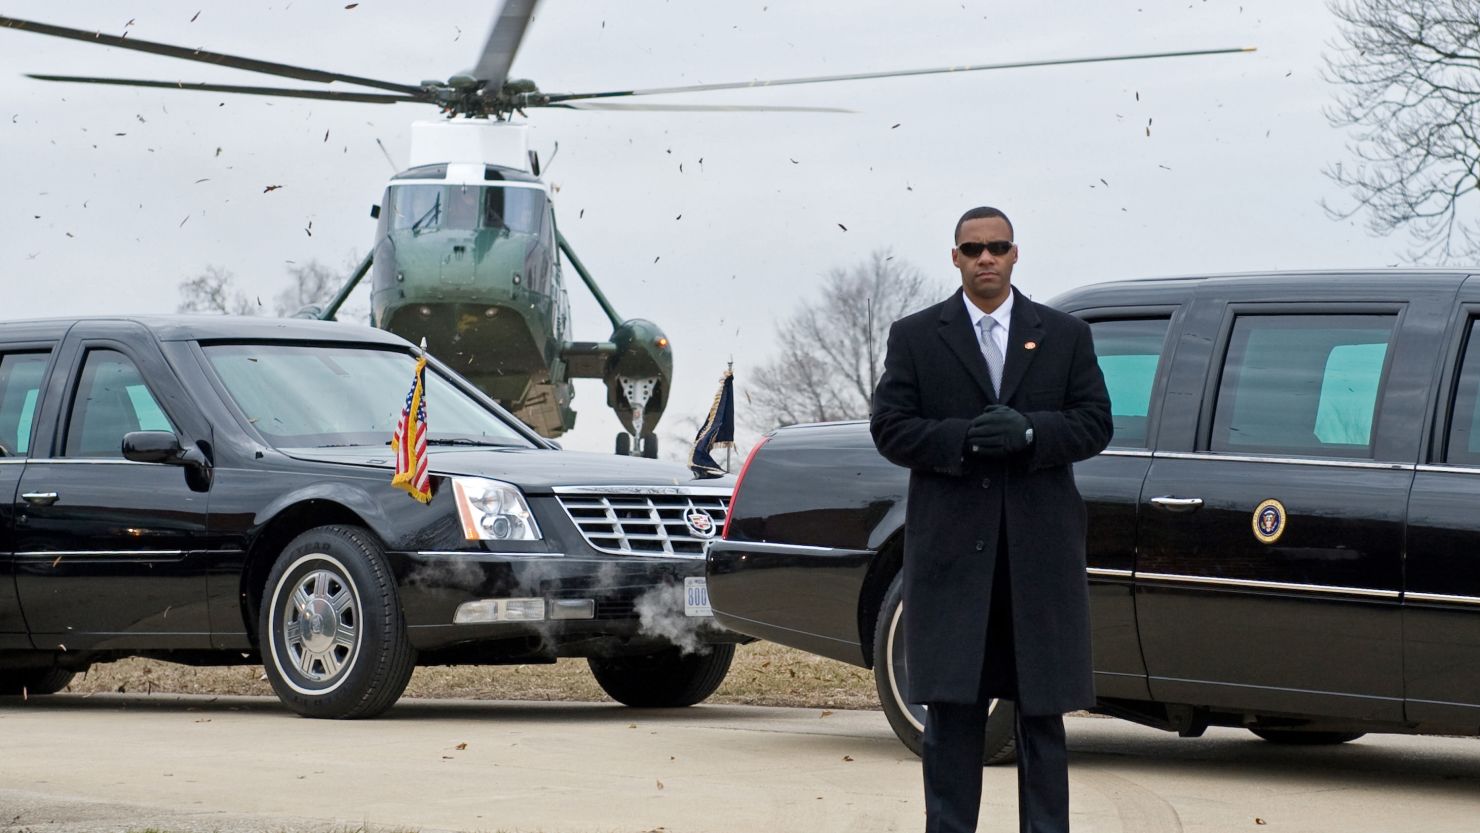  US Secret Service agent stands by President Obama's limousine at Fort McHenry in Baltimore in 2010.